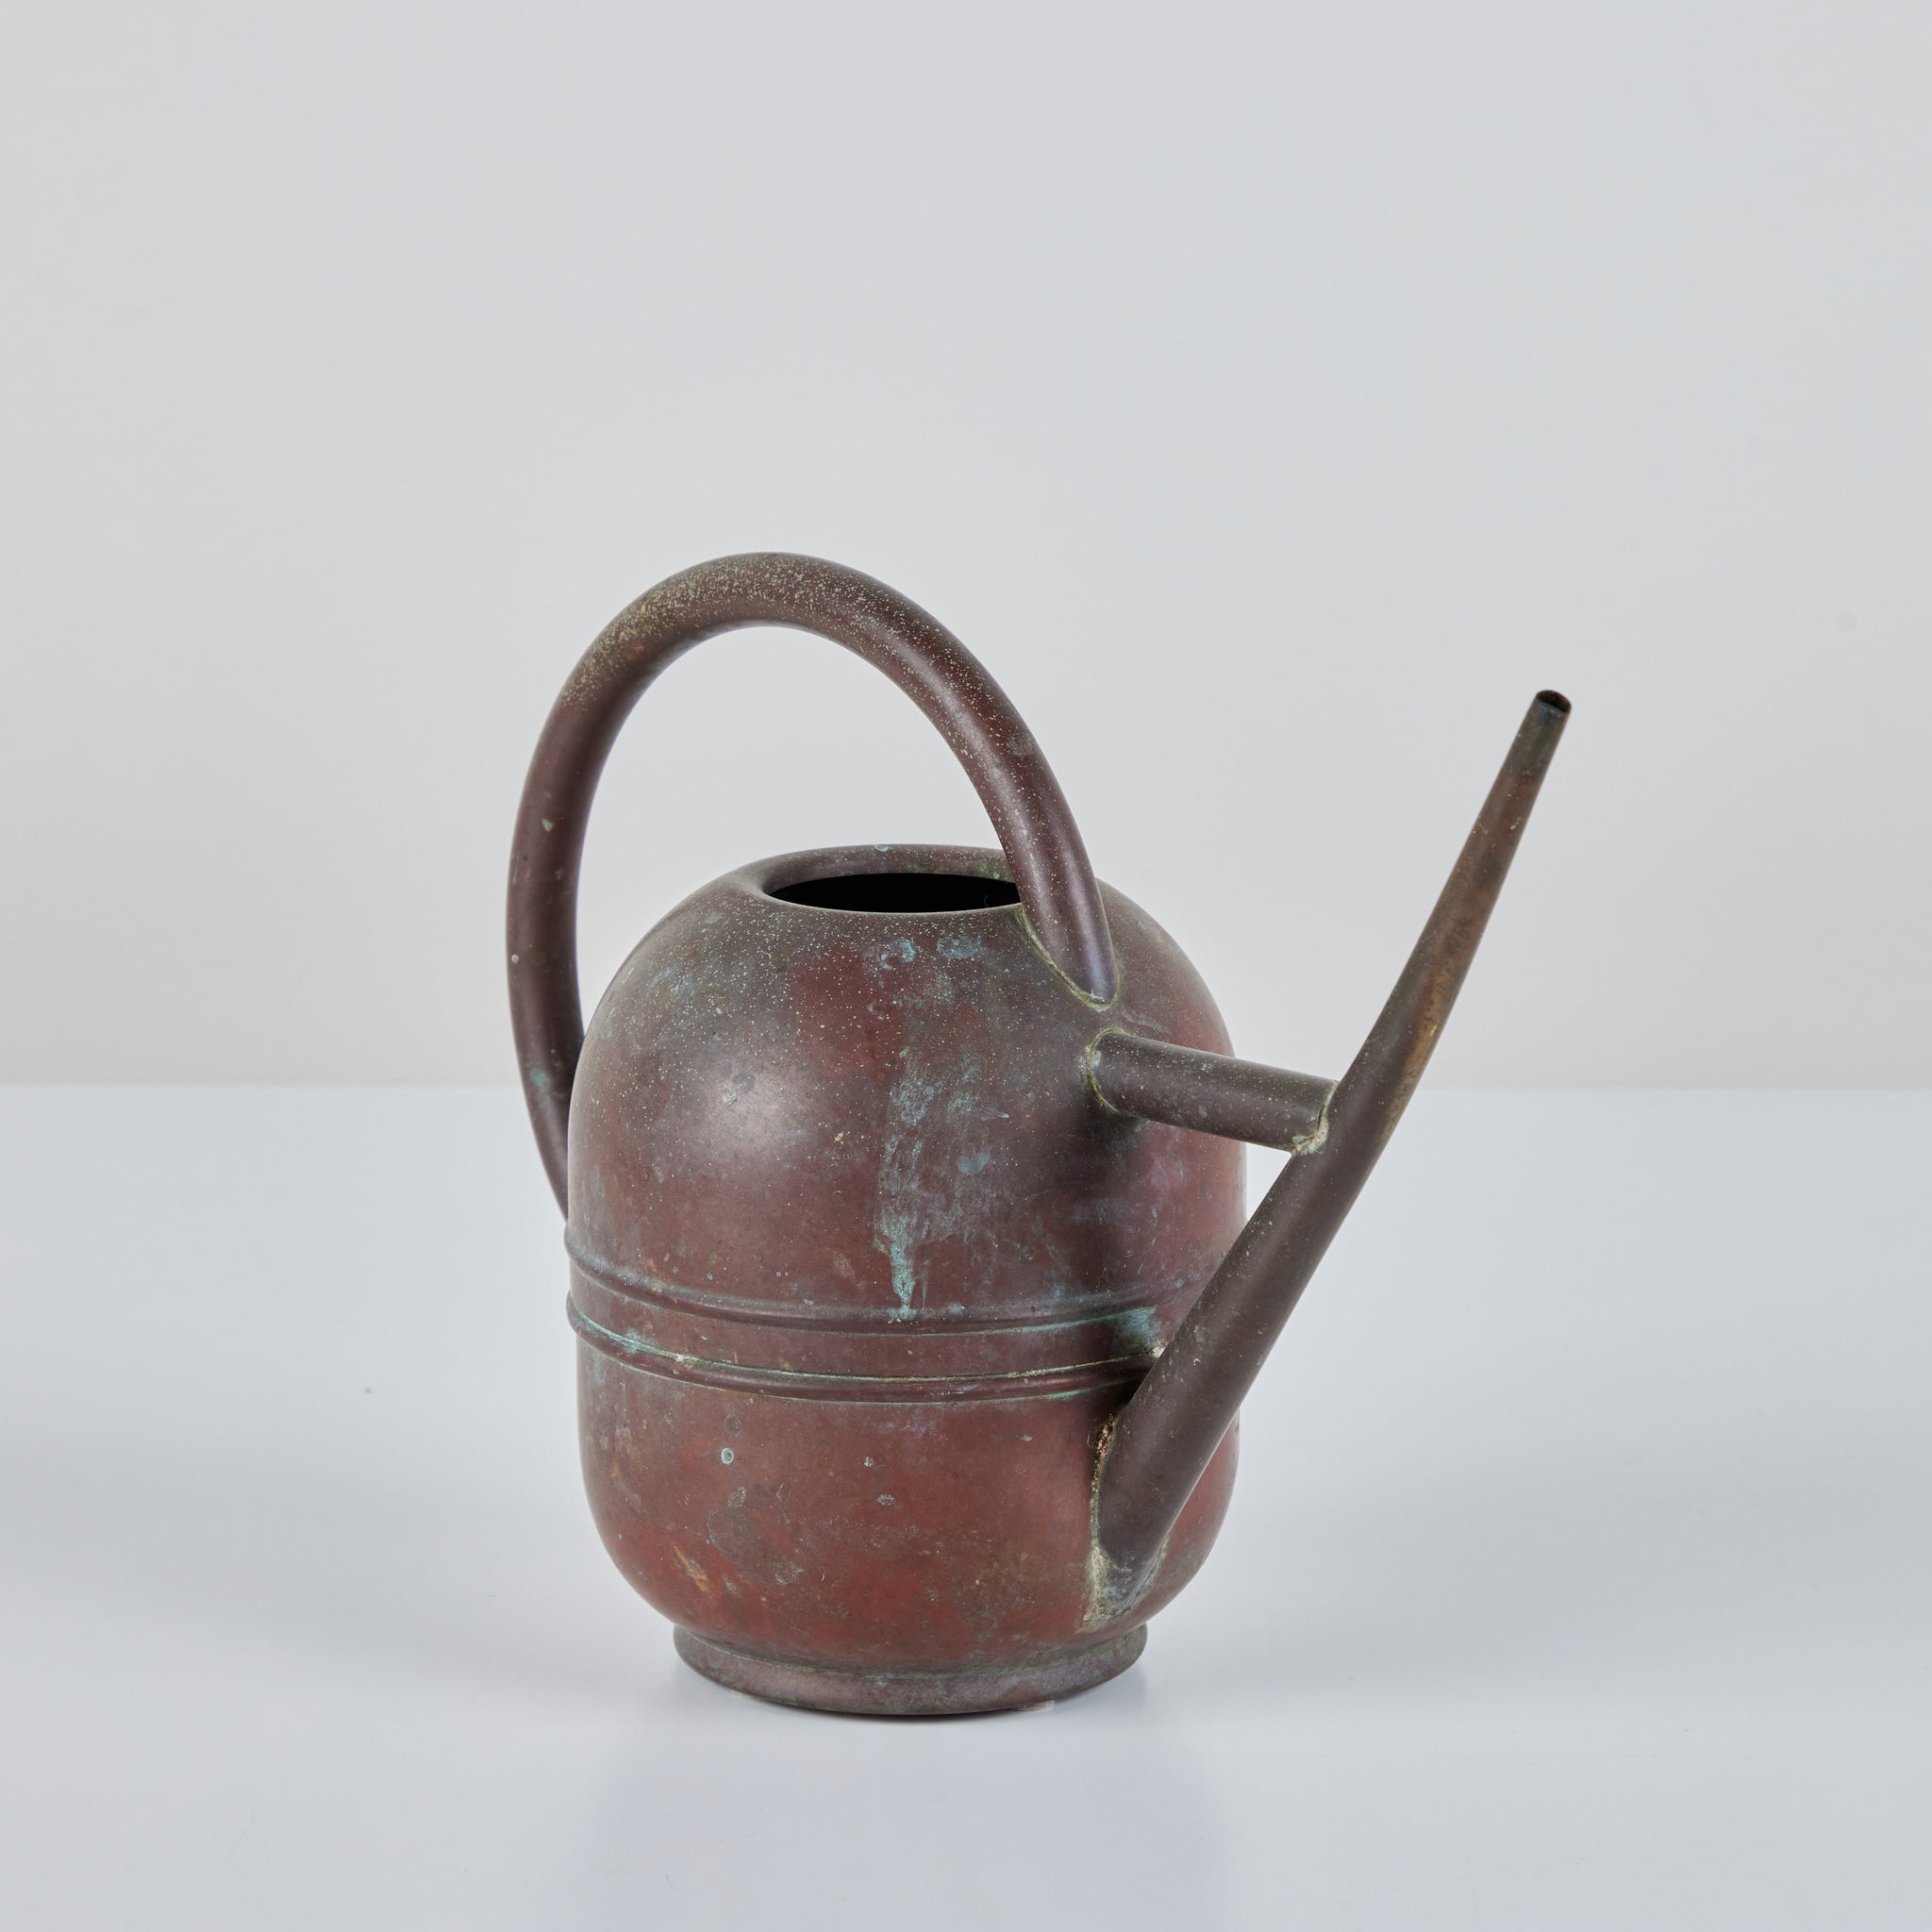 Art Deco Copper and Brass Watering Can by Chase